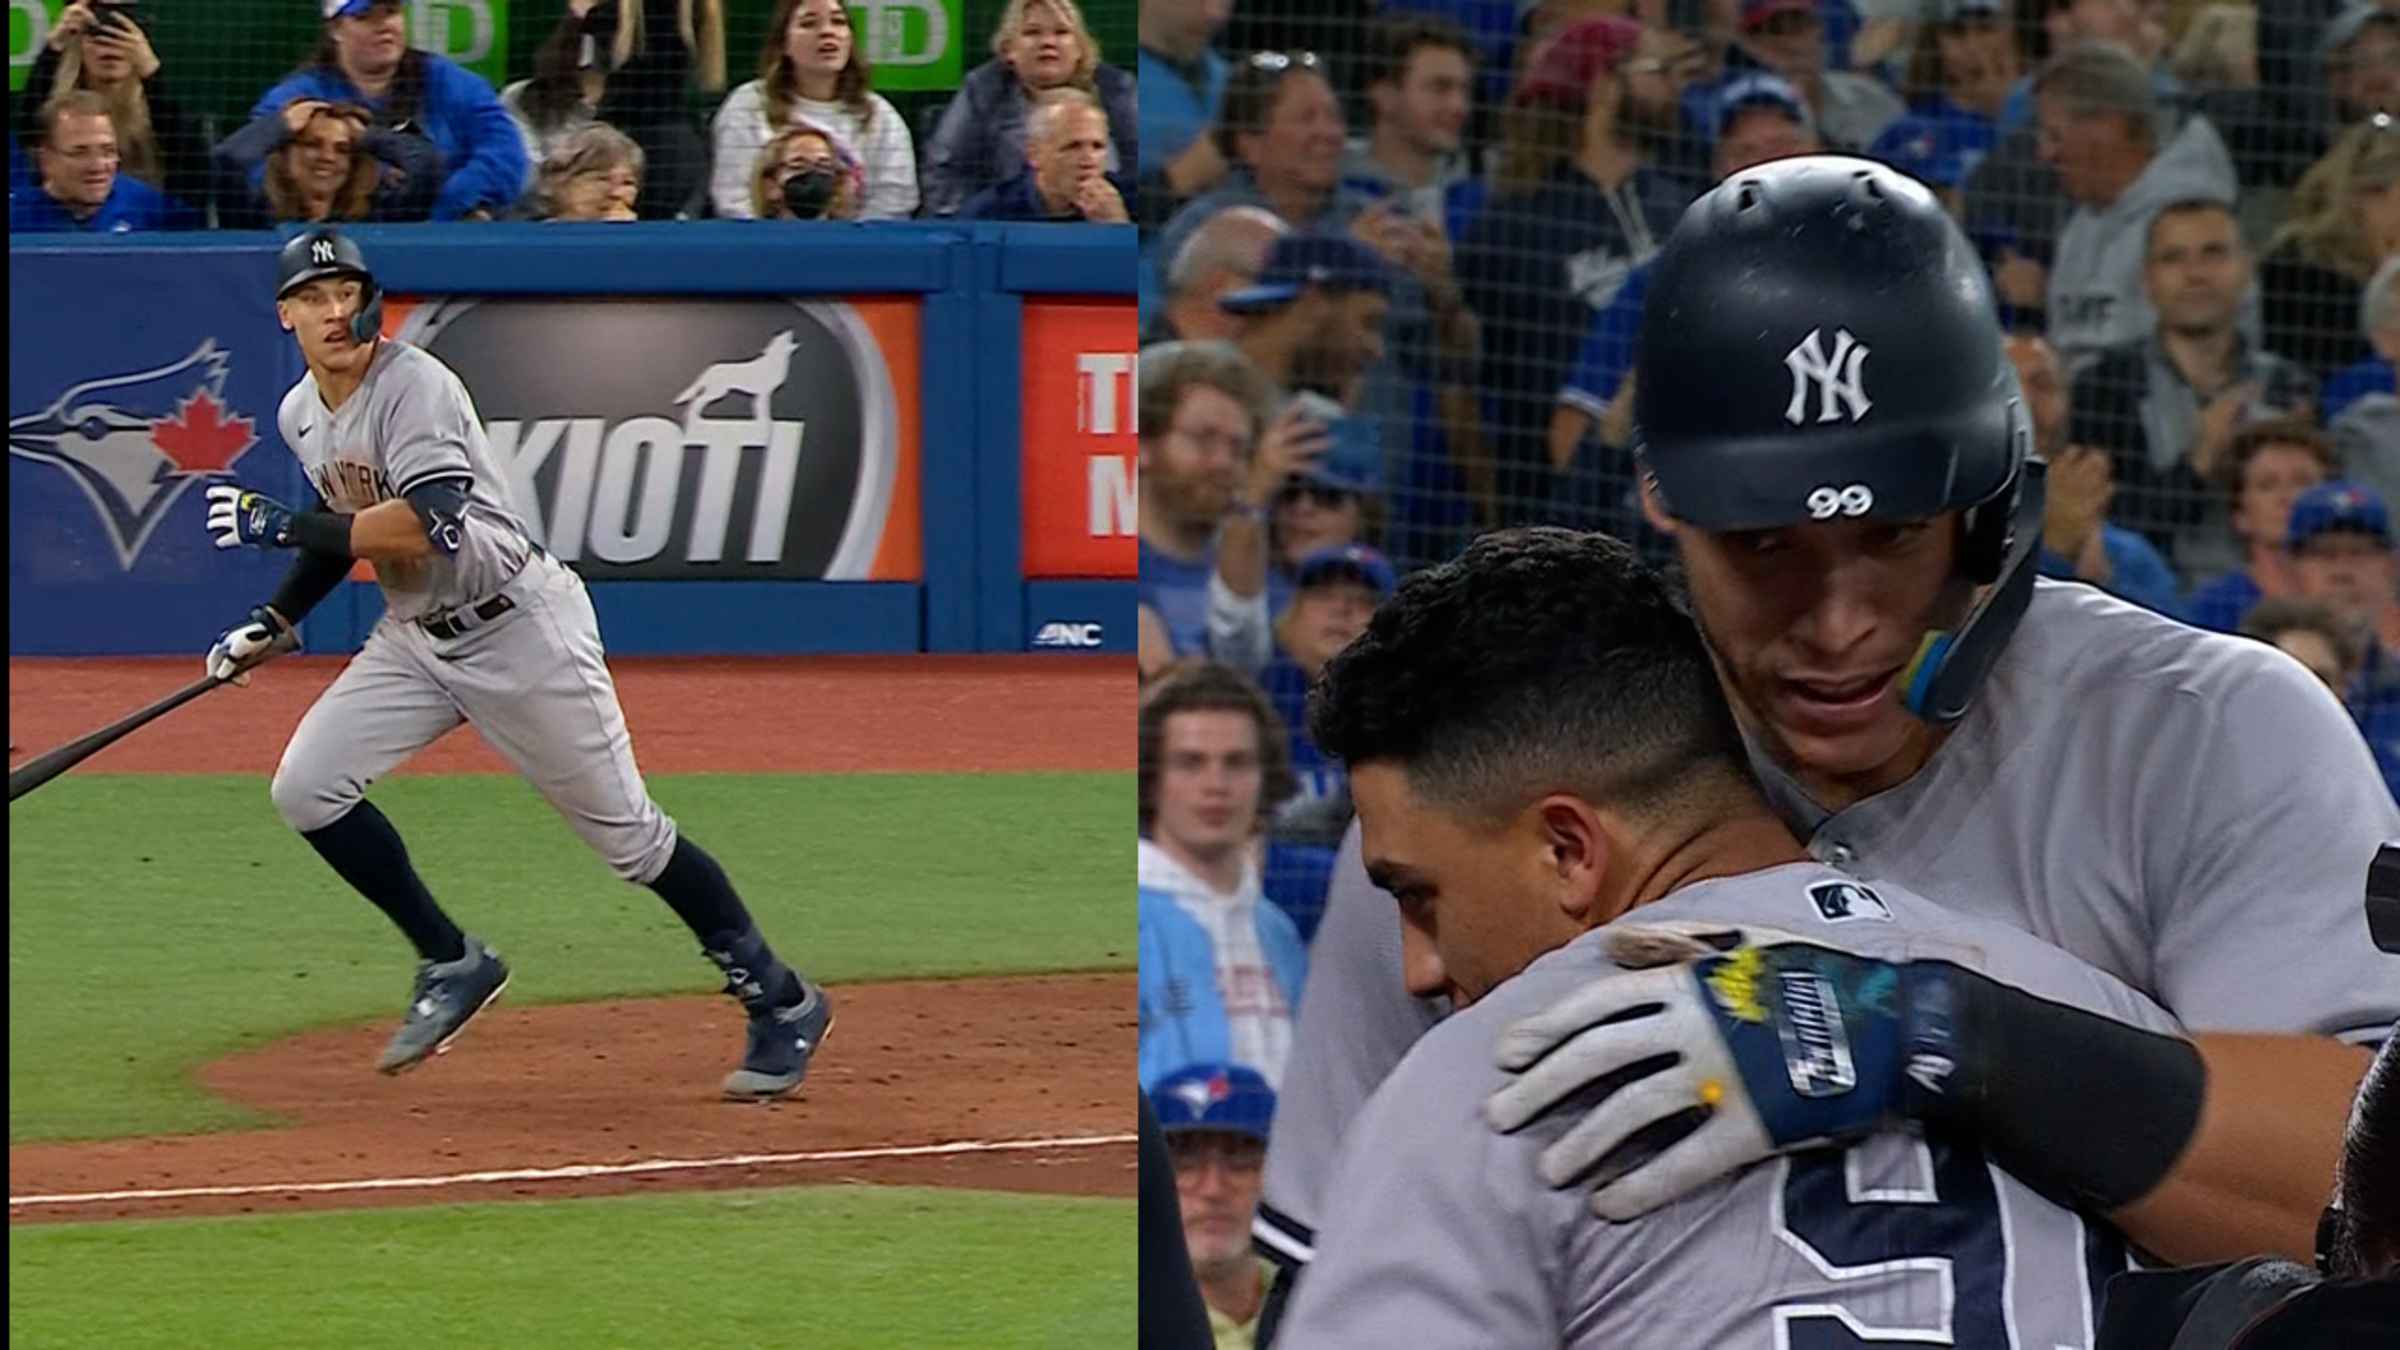 Aaron Judge Hits 61st Home Run to Tie Roger Maris' Record